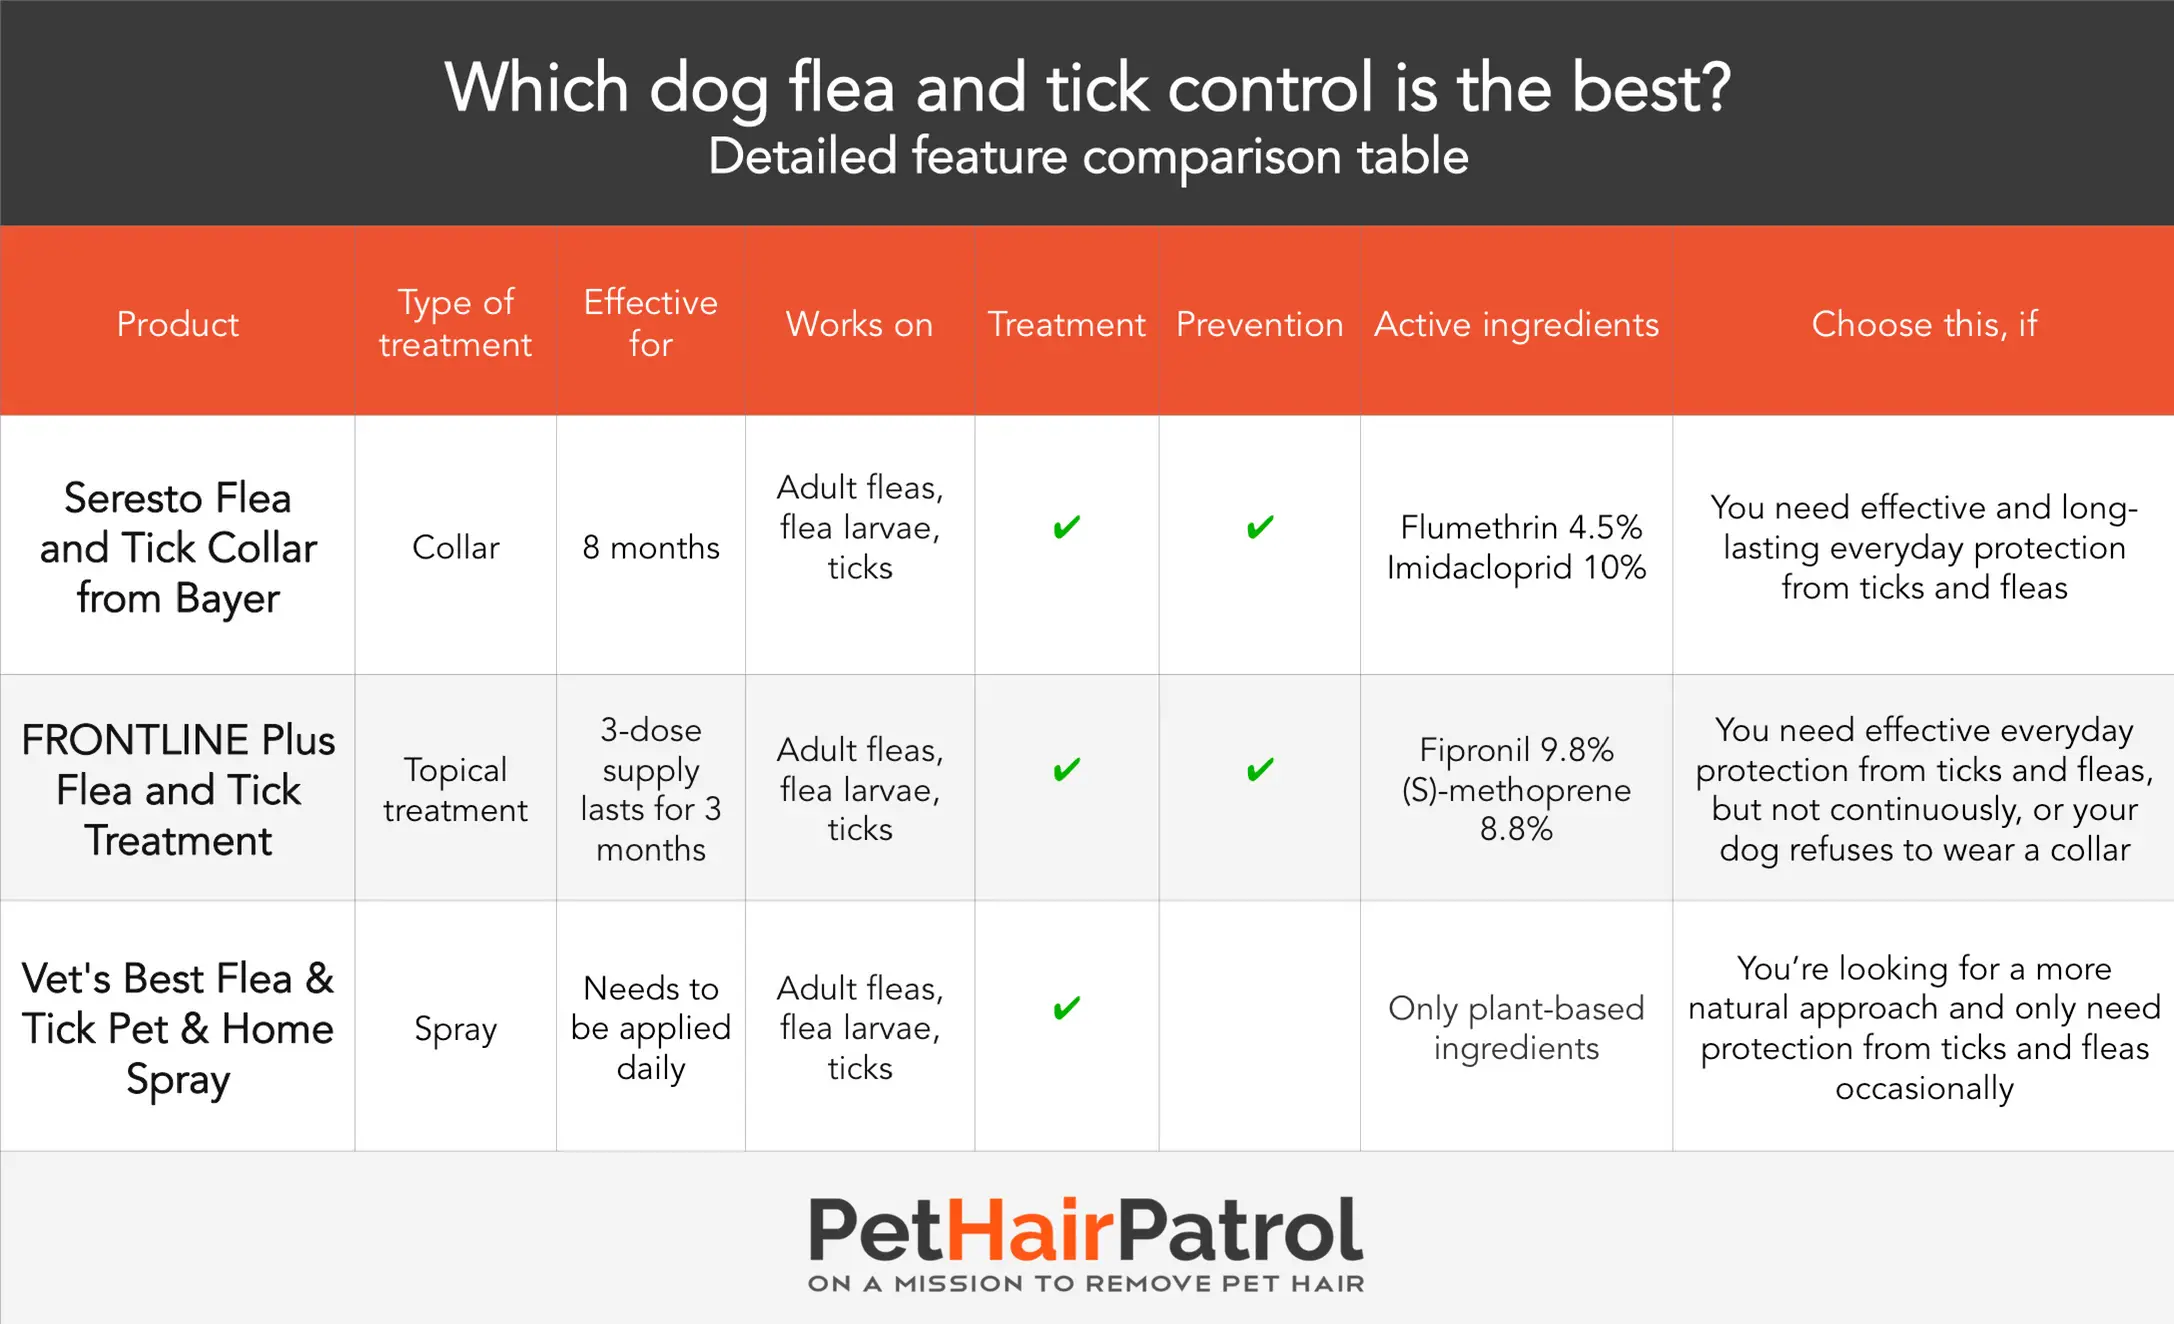 which dog flea and tick control is the best